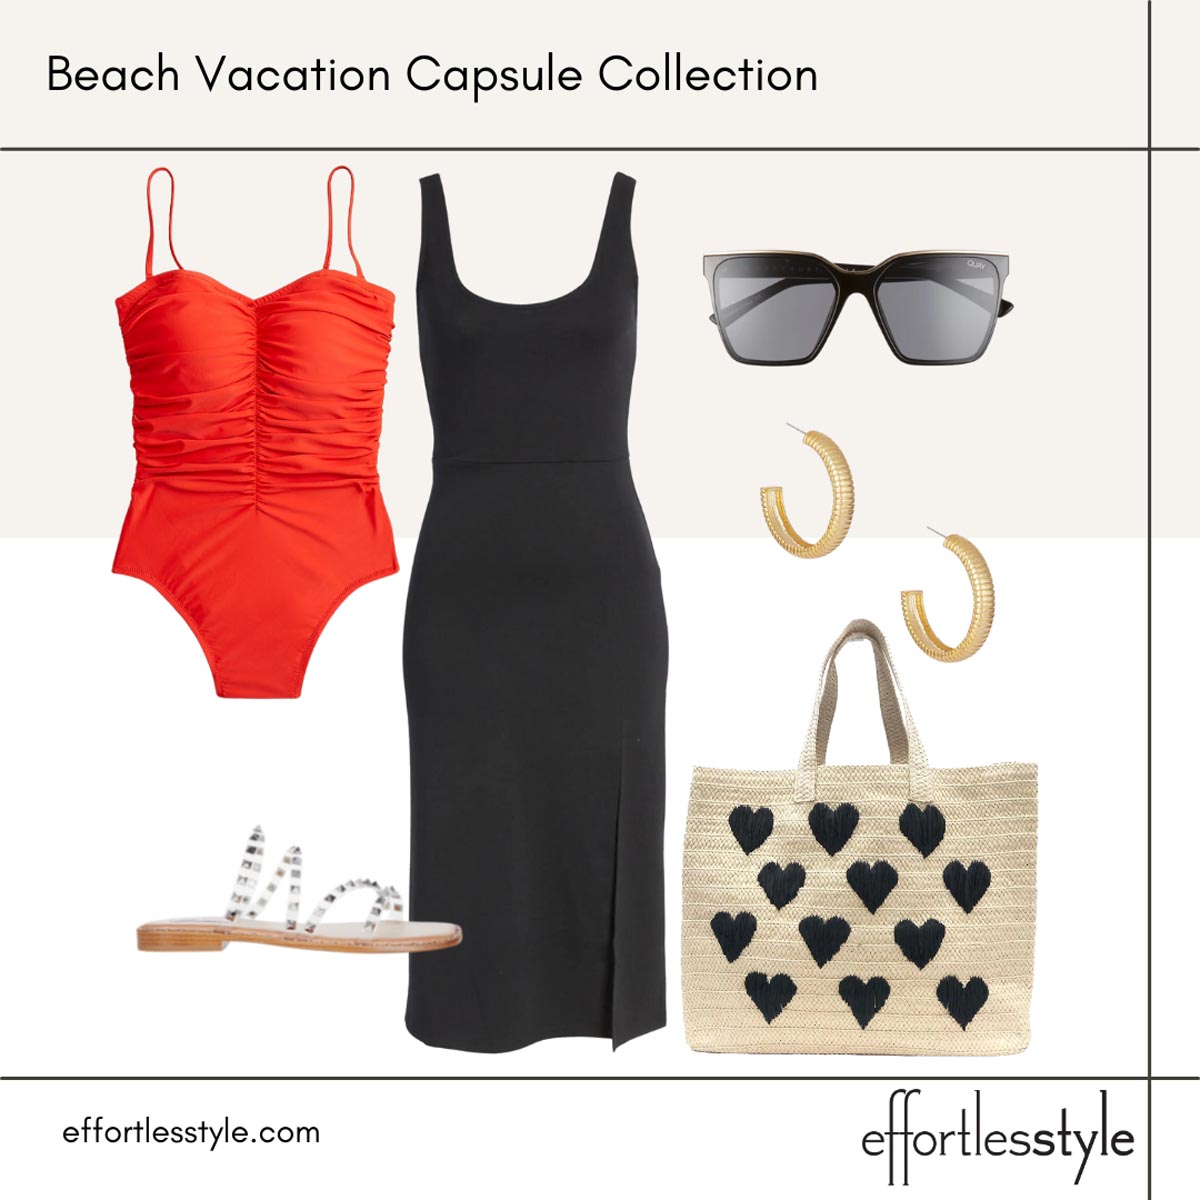 Styled beach looks styled looks for pool what to wear at a resort resort wear how to wear a midi dress at the beach everyday gold hoops clear sandals embellished sandals